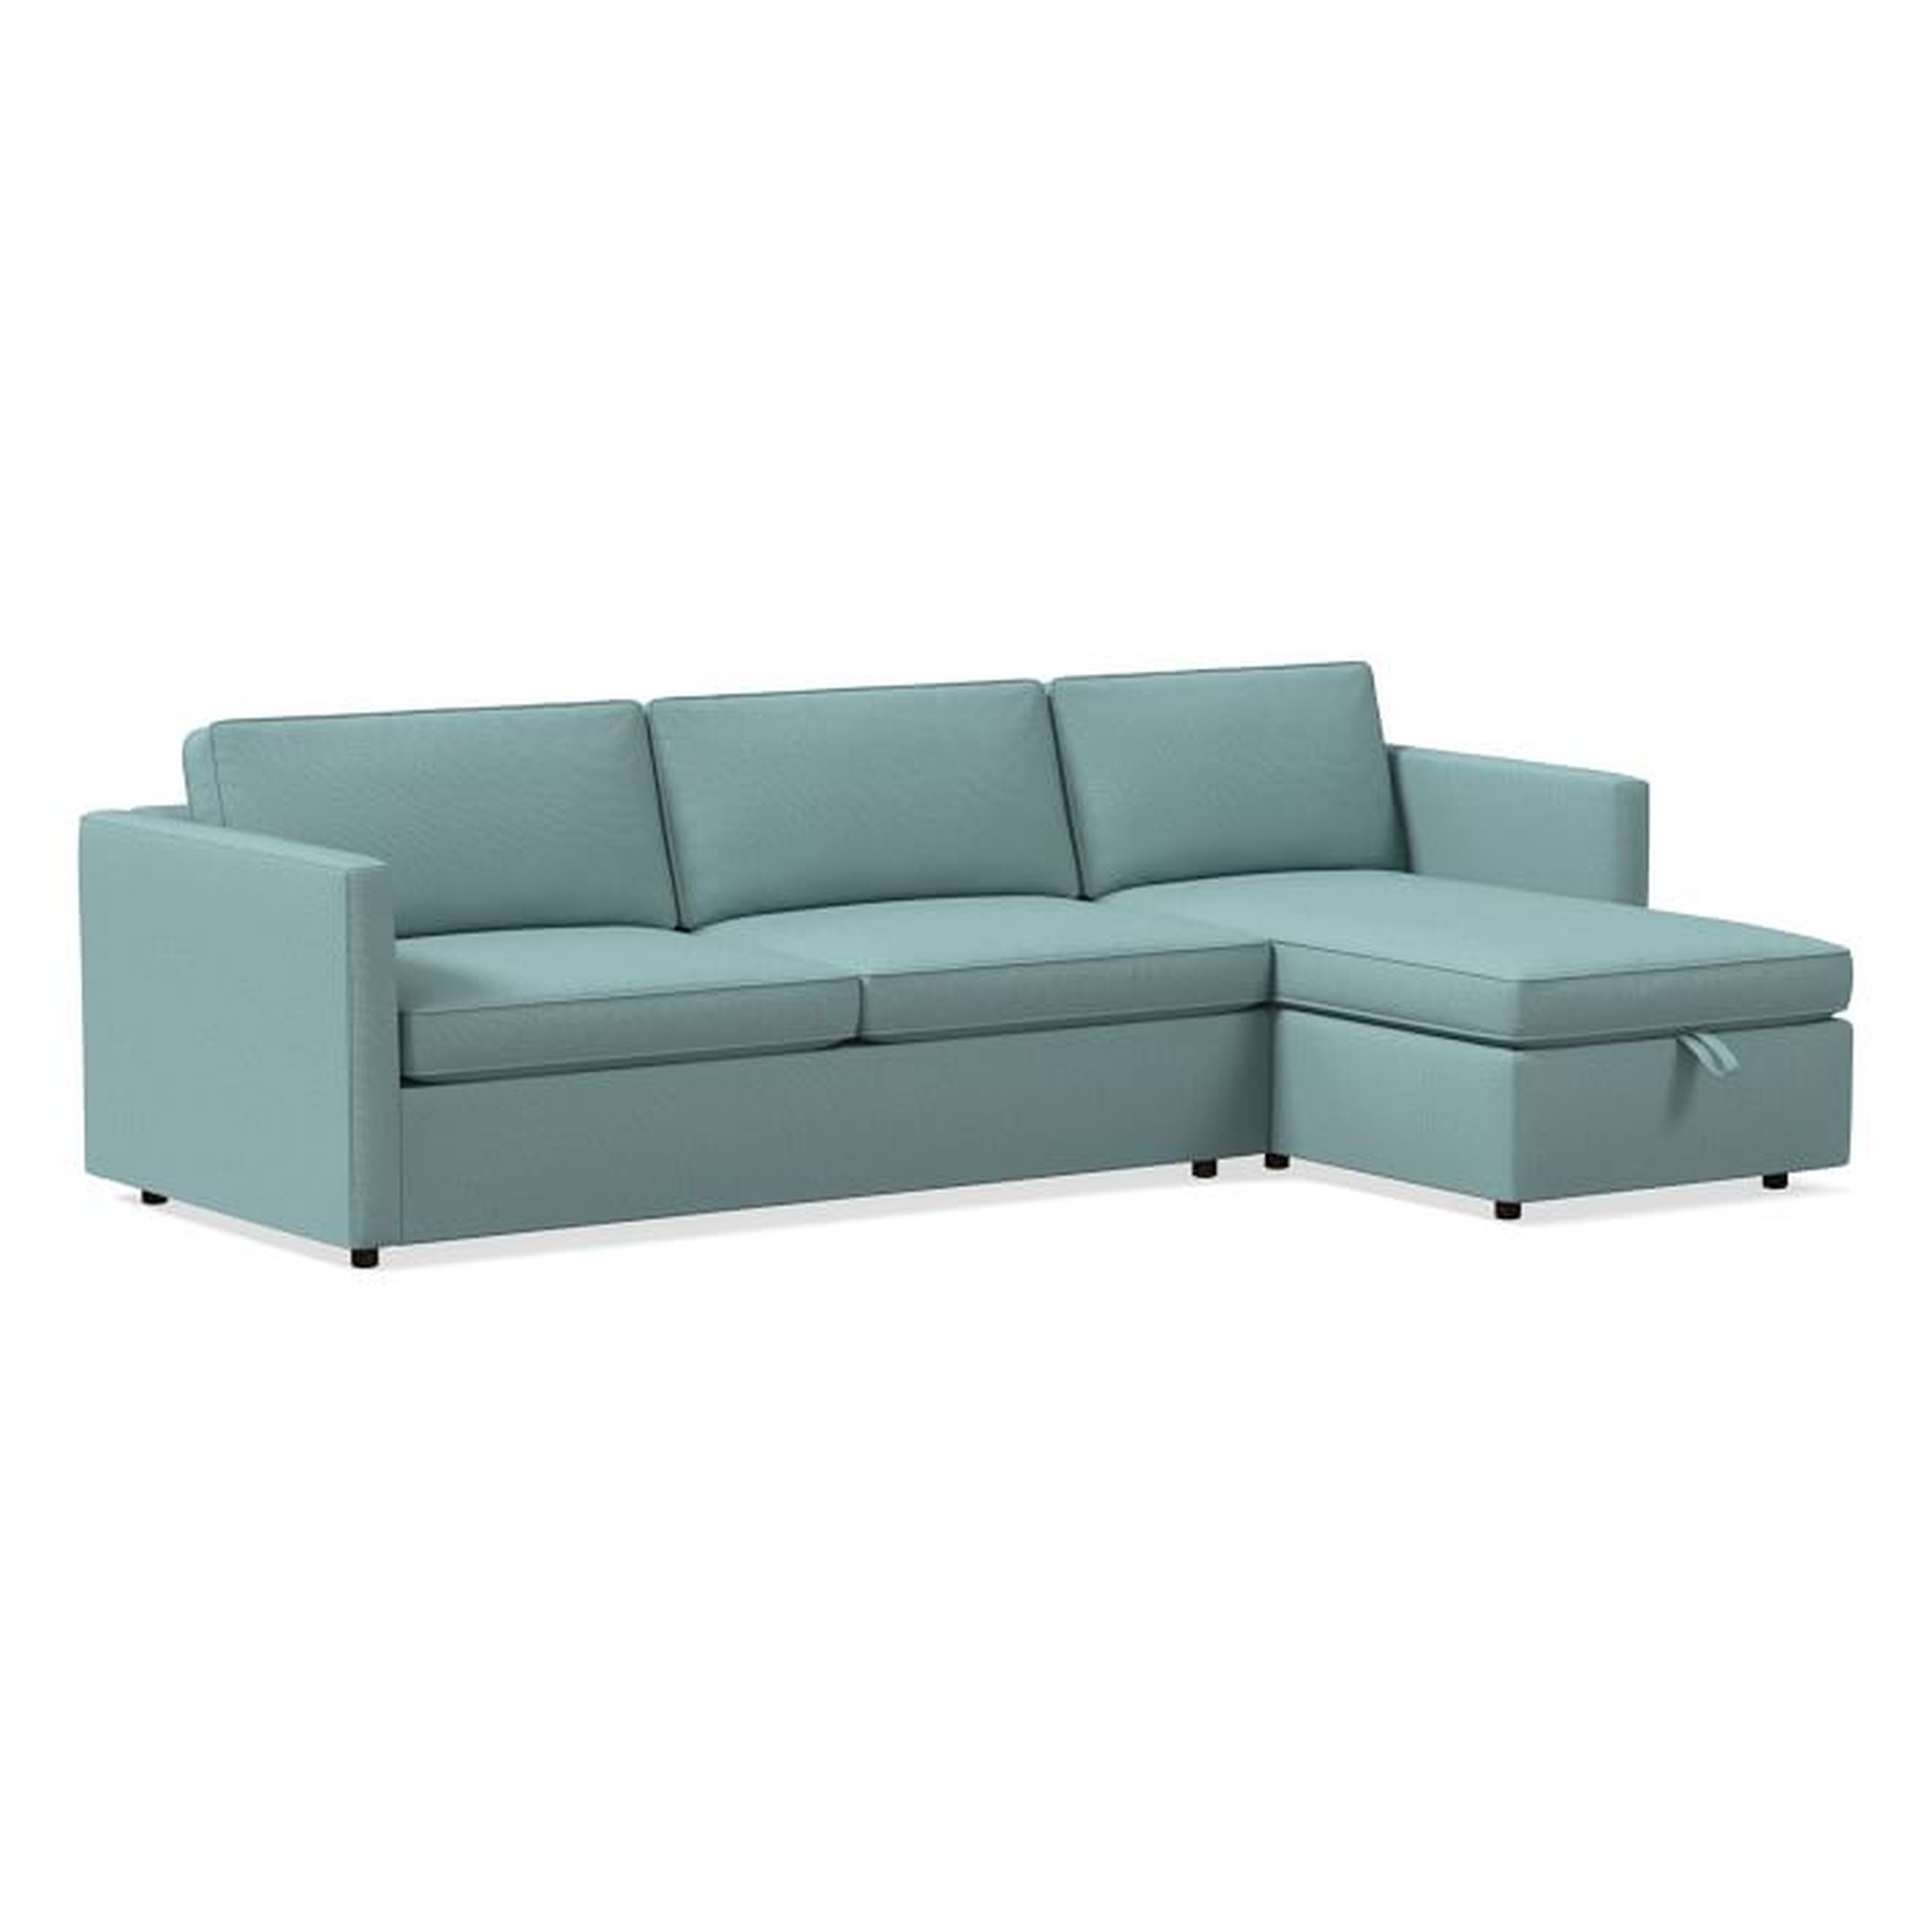 Harris Sectional Set 07: Left Arm 75" Sofa, Right Arm Storage Chaise, Poly, Heathered Weave, Eucalyptus, - West Elm